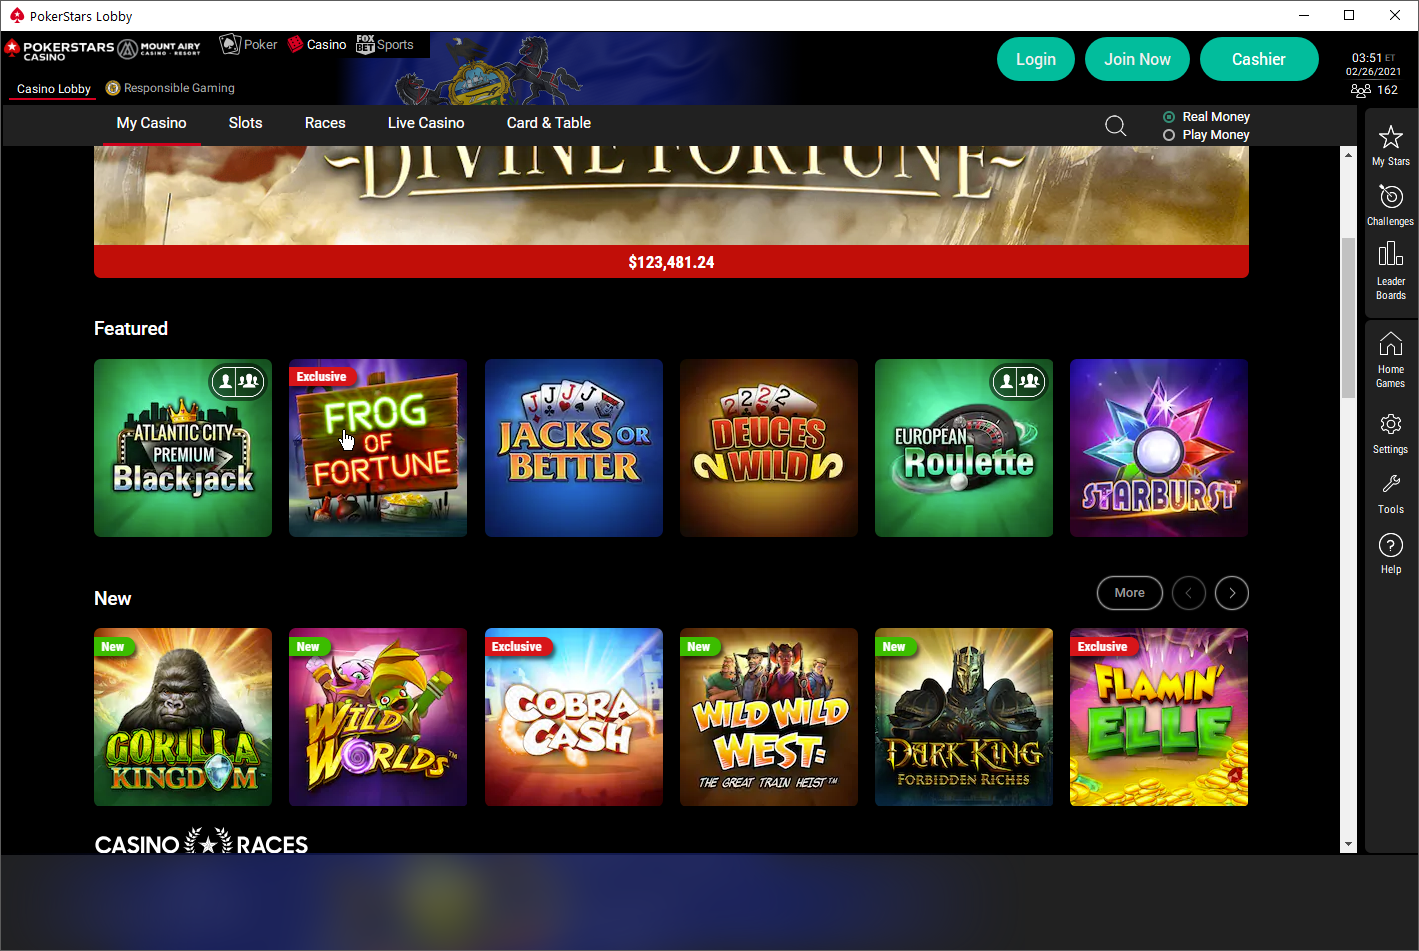 The casino button at the top takes you to PokerStars Casino where a full selection of slots are on offer